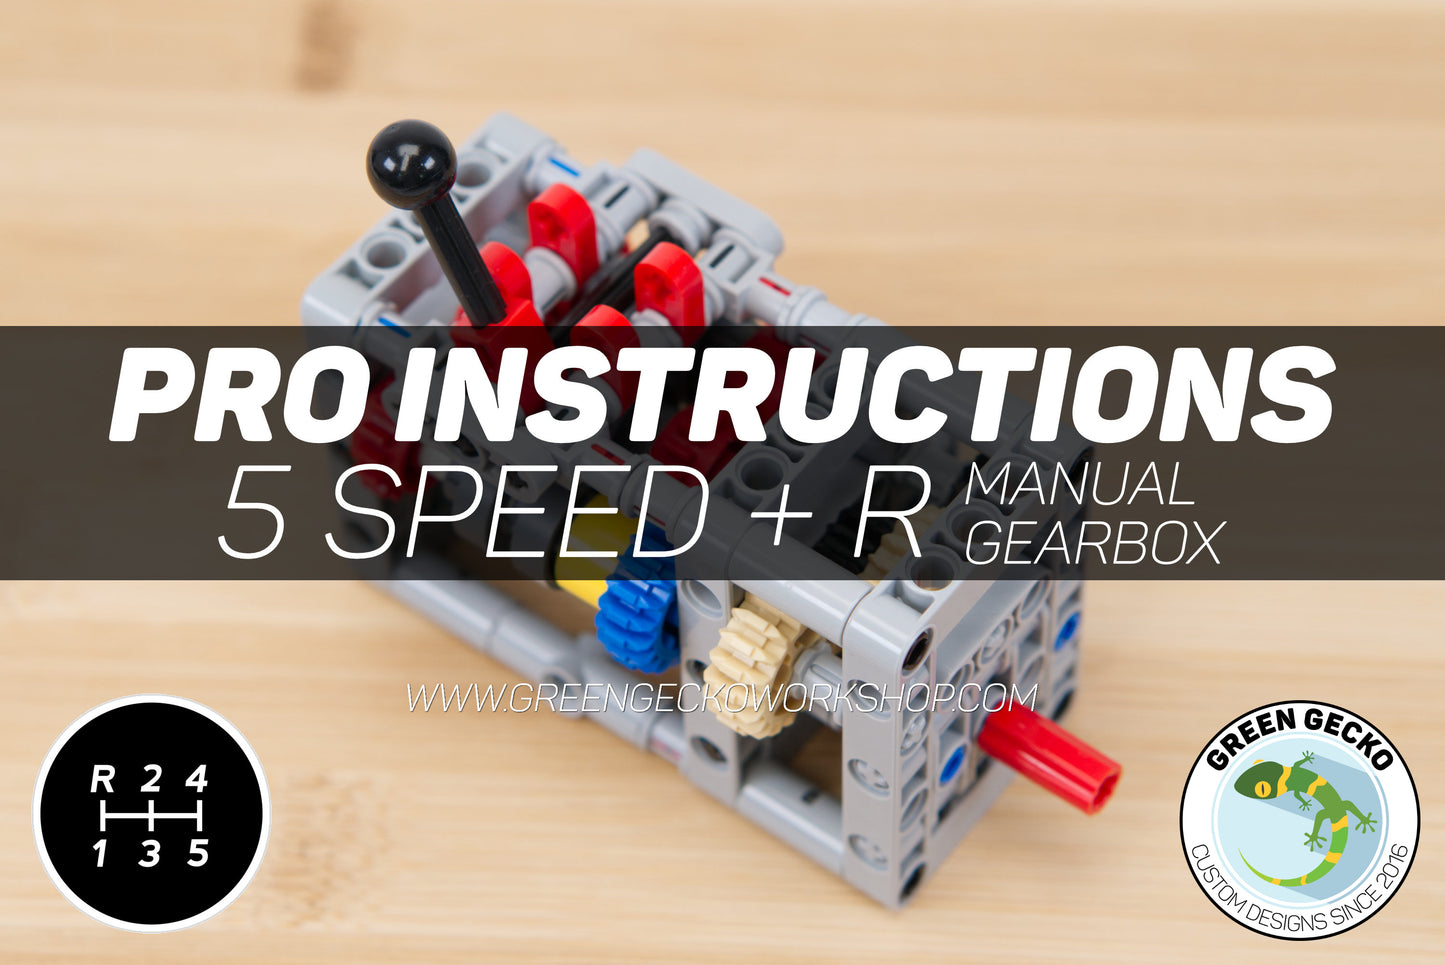 Pro Instructions - LEGO 5 Speed + Reverse Manual Gearbox